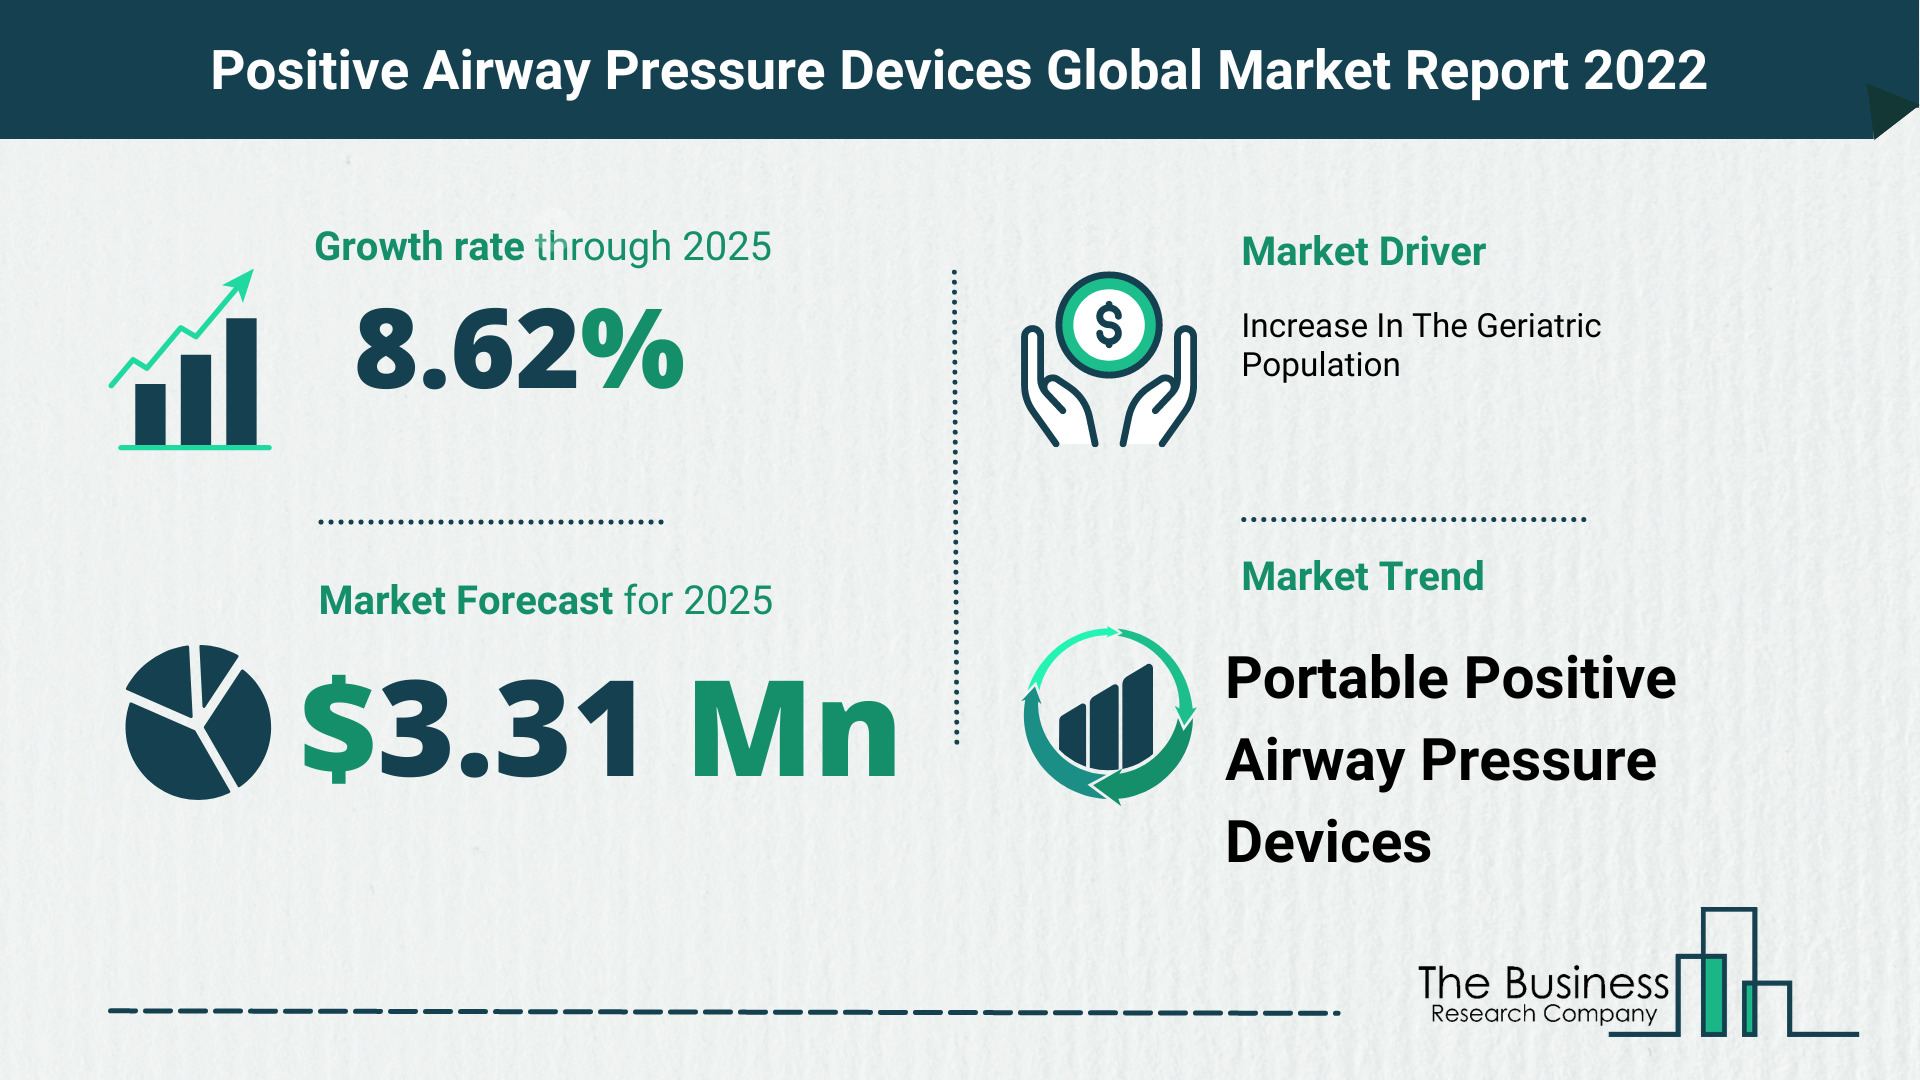 Latest Positive Airway Pressure Devices Market Growth Study 2022-2026 By The Business Research Company